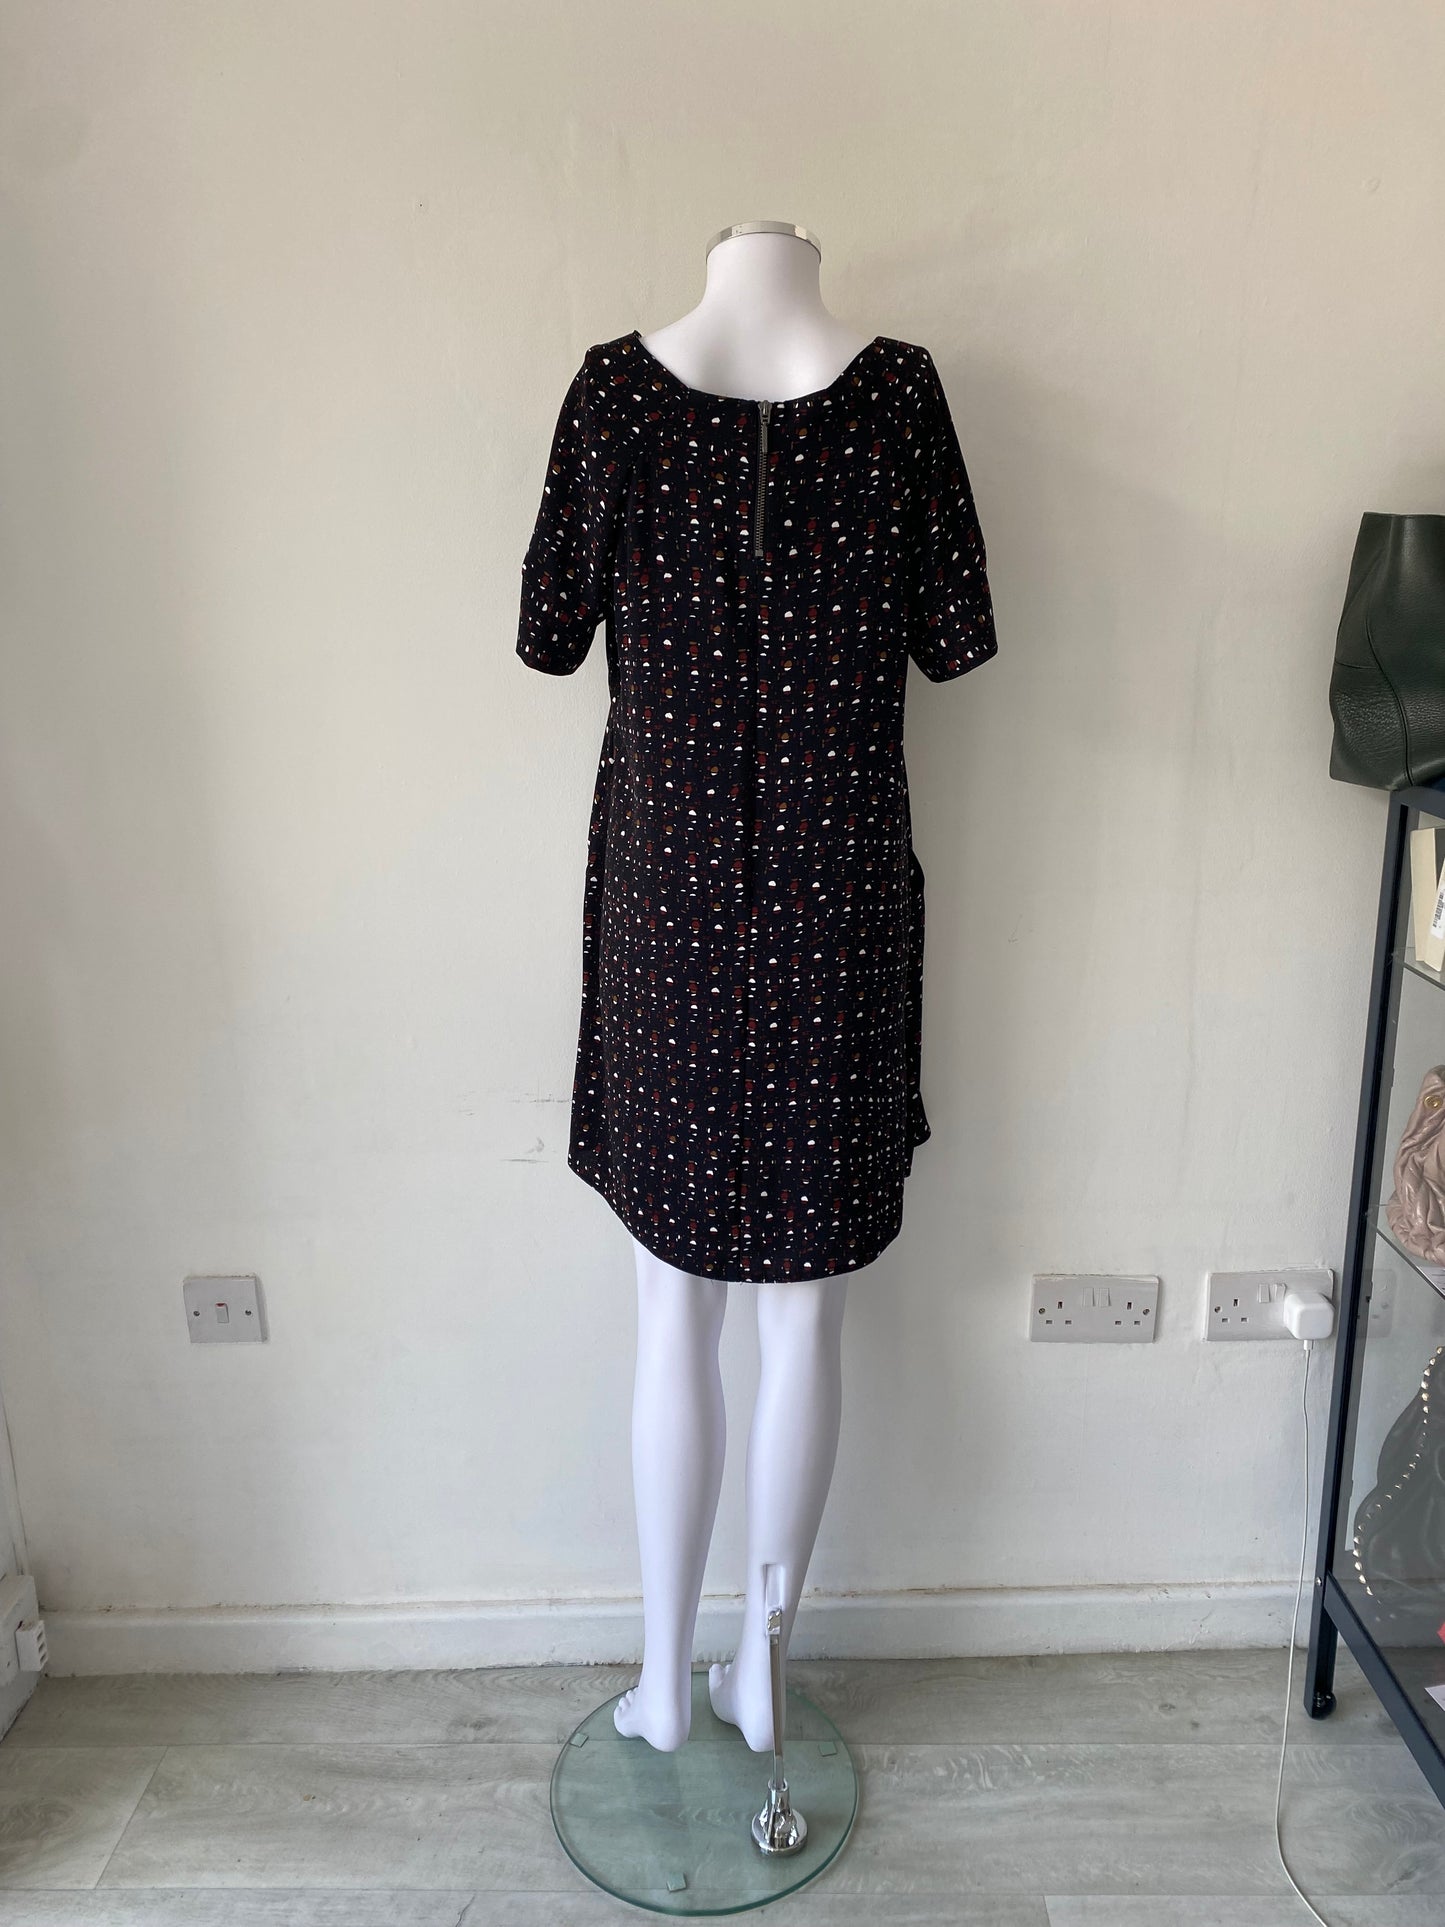 Phase Eight Patterned Dress Size 10